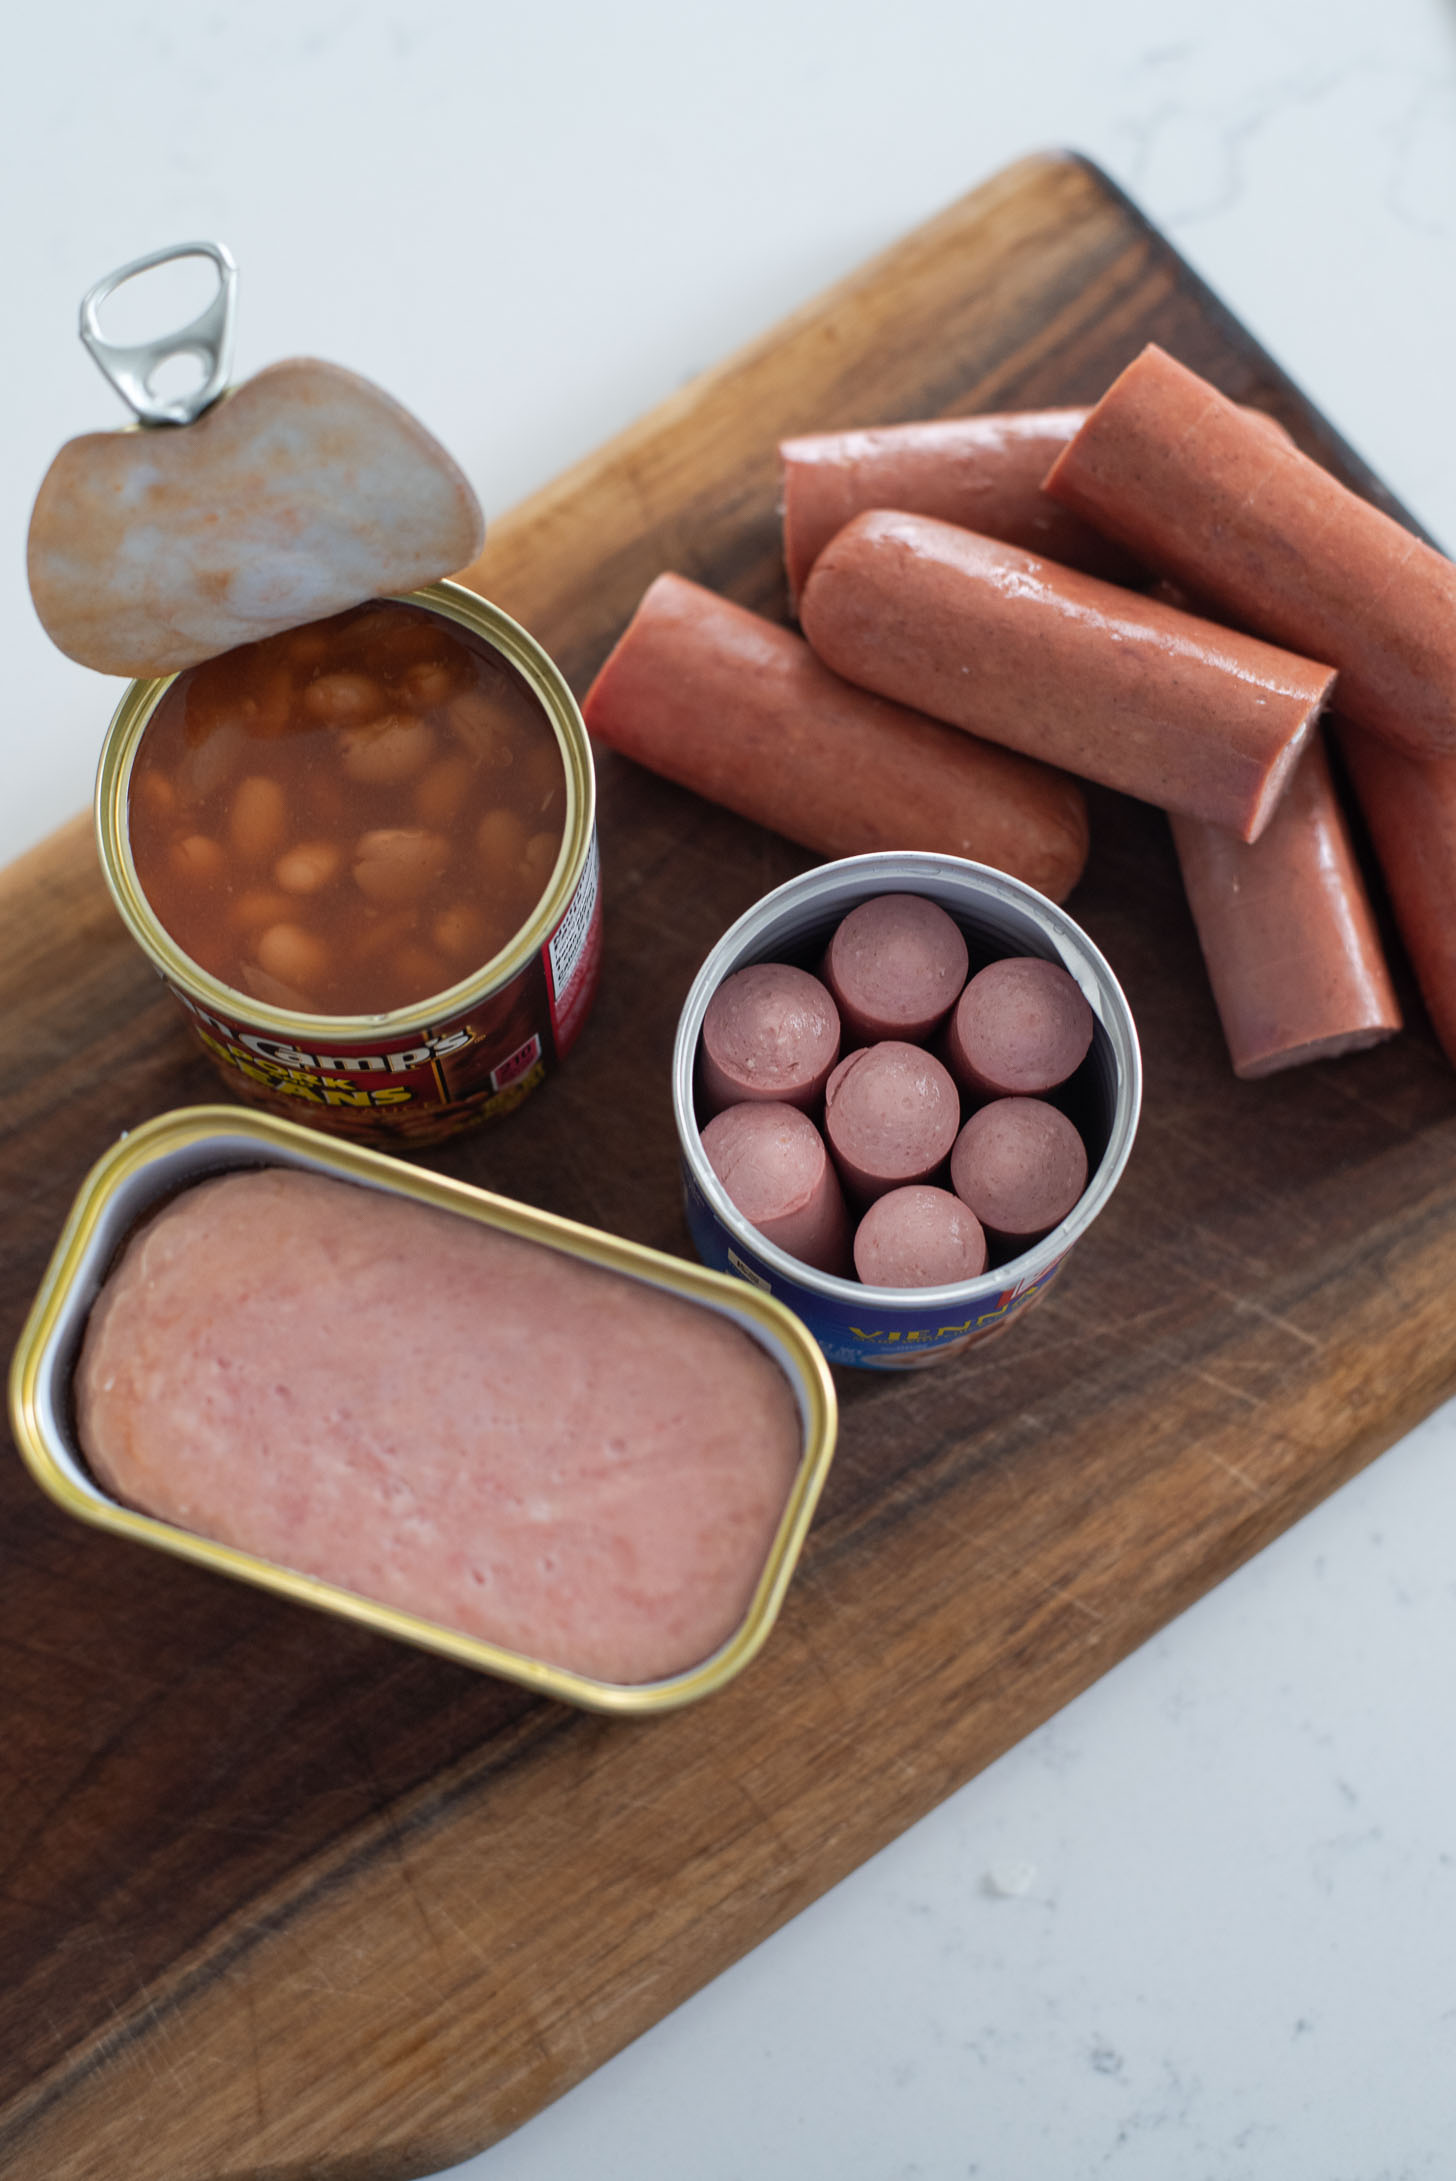 Processed meats used for making Korean army stew (budae jjigae).